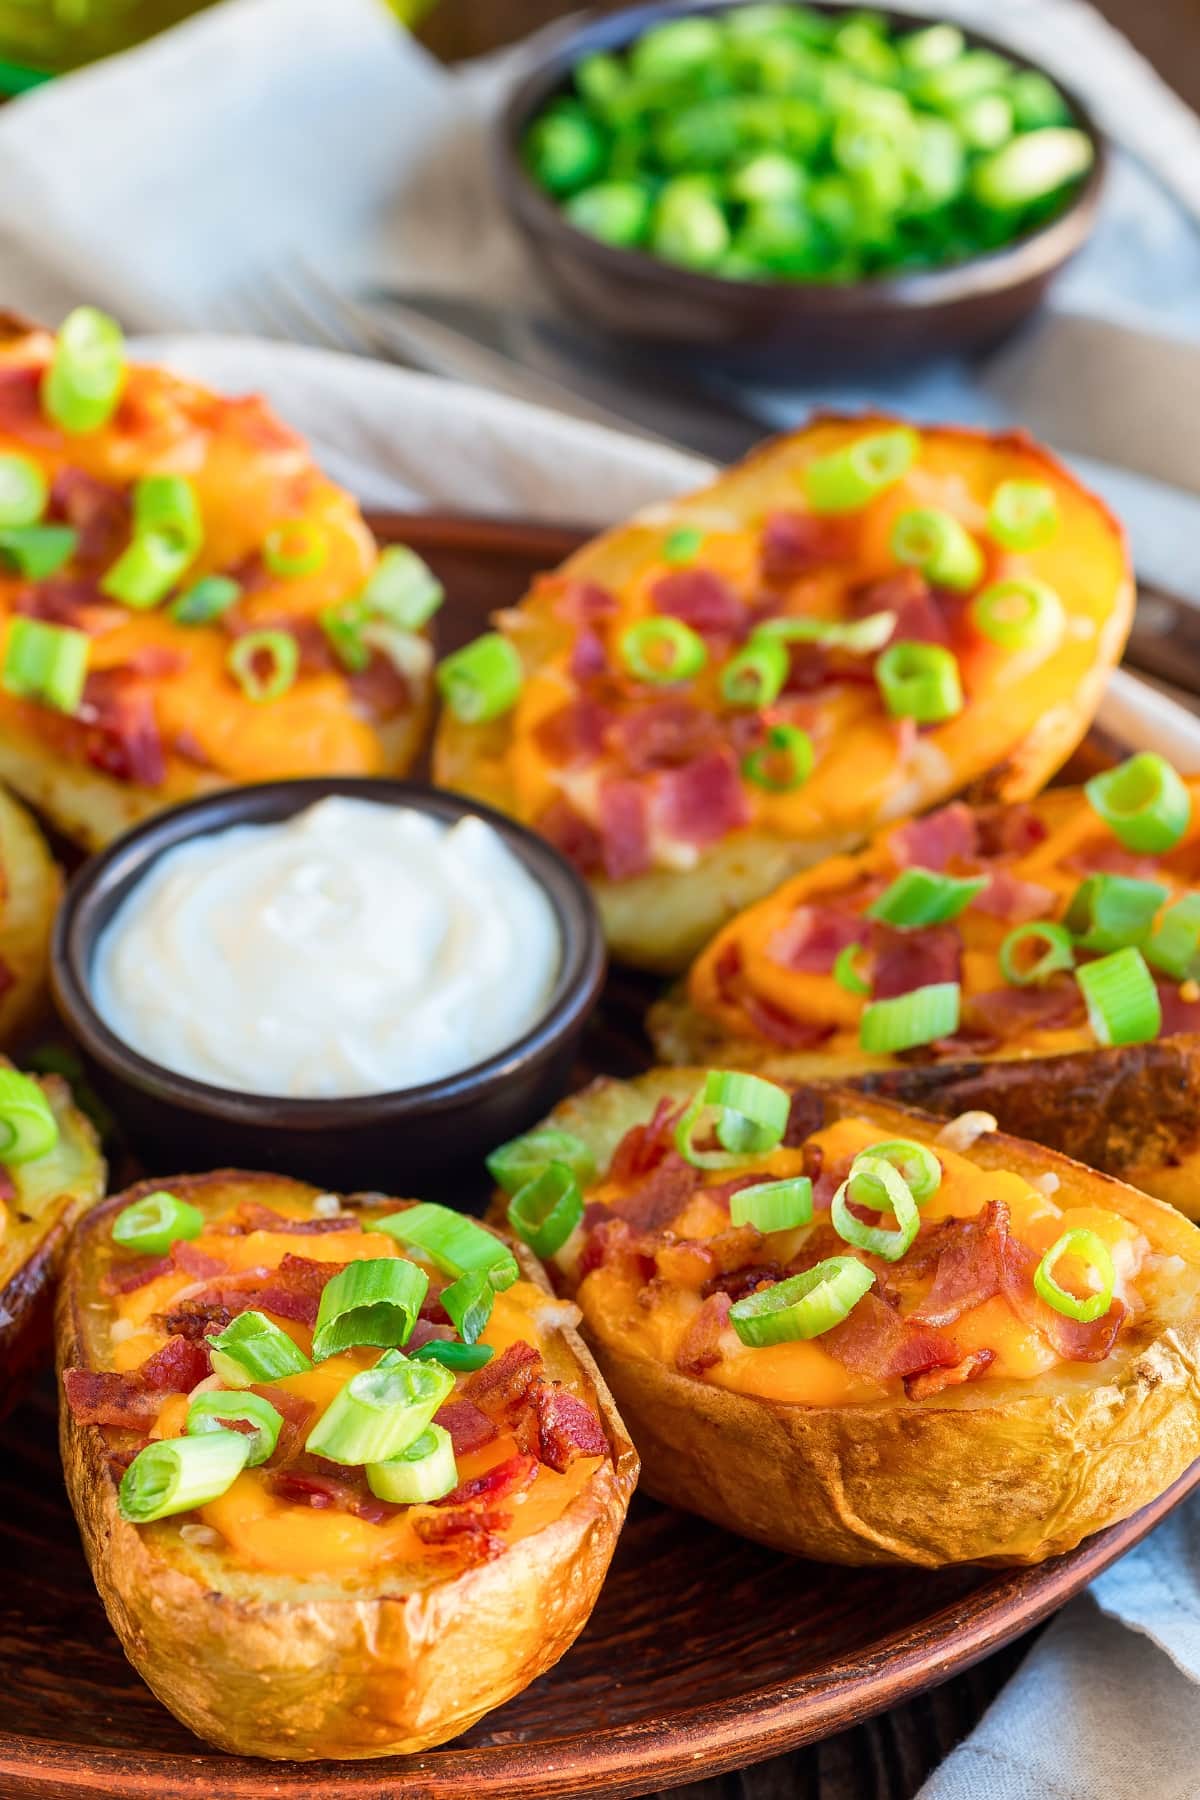 Potato skins arranged in a wooden tray with cheesy filling garnished with chopped bacon.